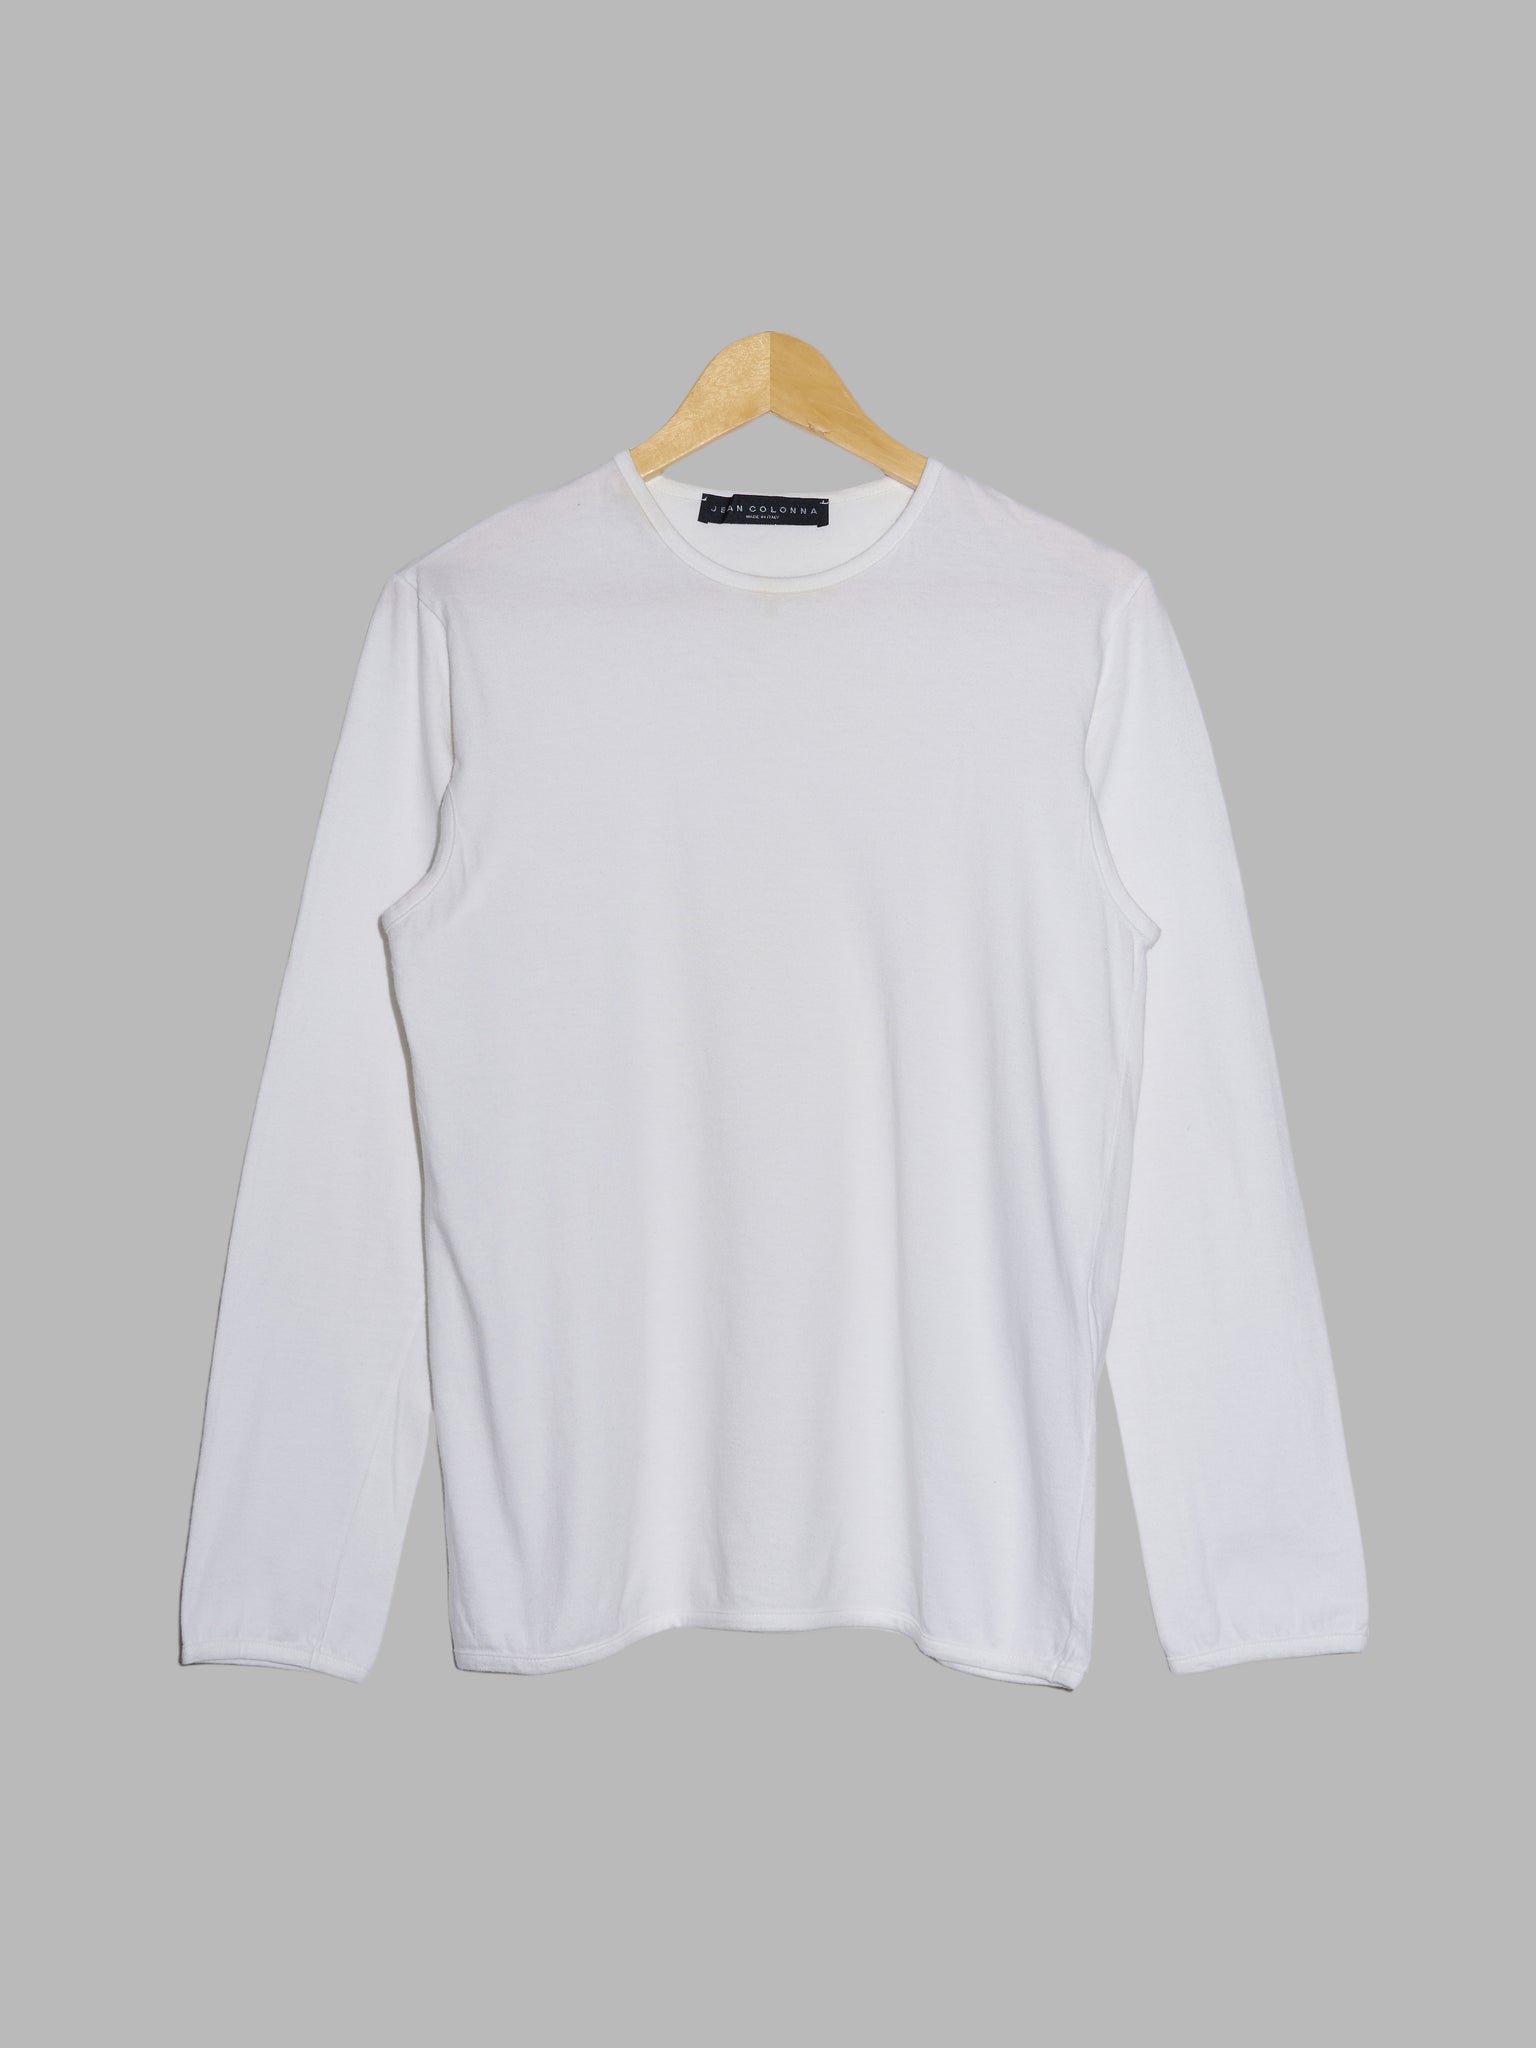 Jean Colonna white cotton jersey long sleeve t-shirt with underarm opening - S